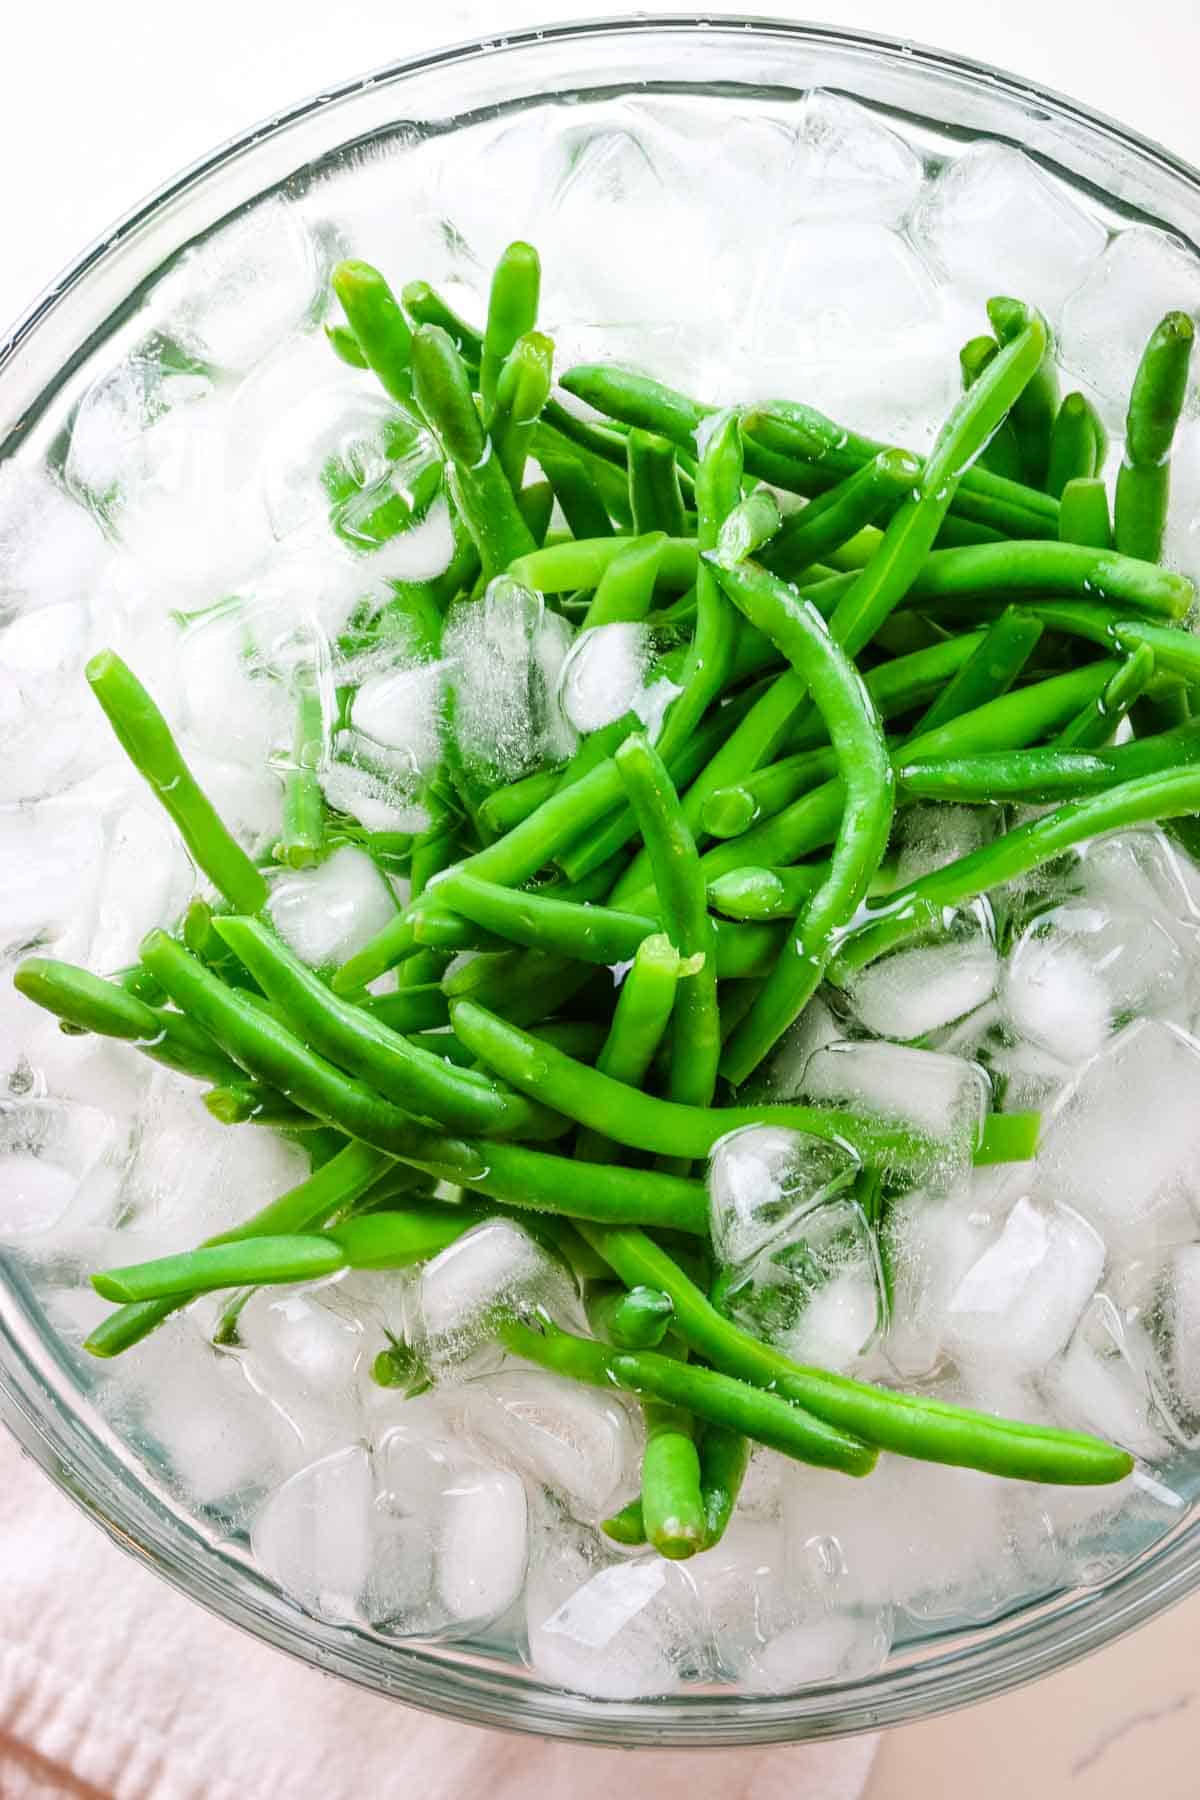 blanching green beans in ice water.